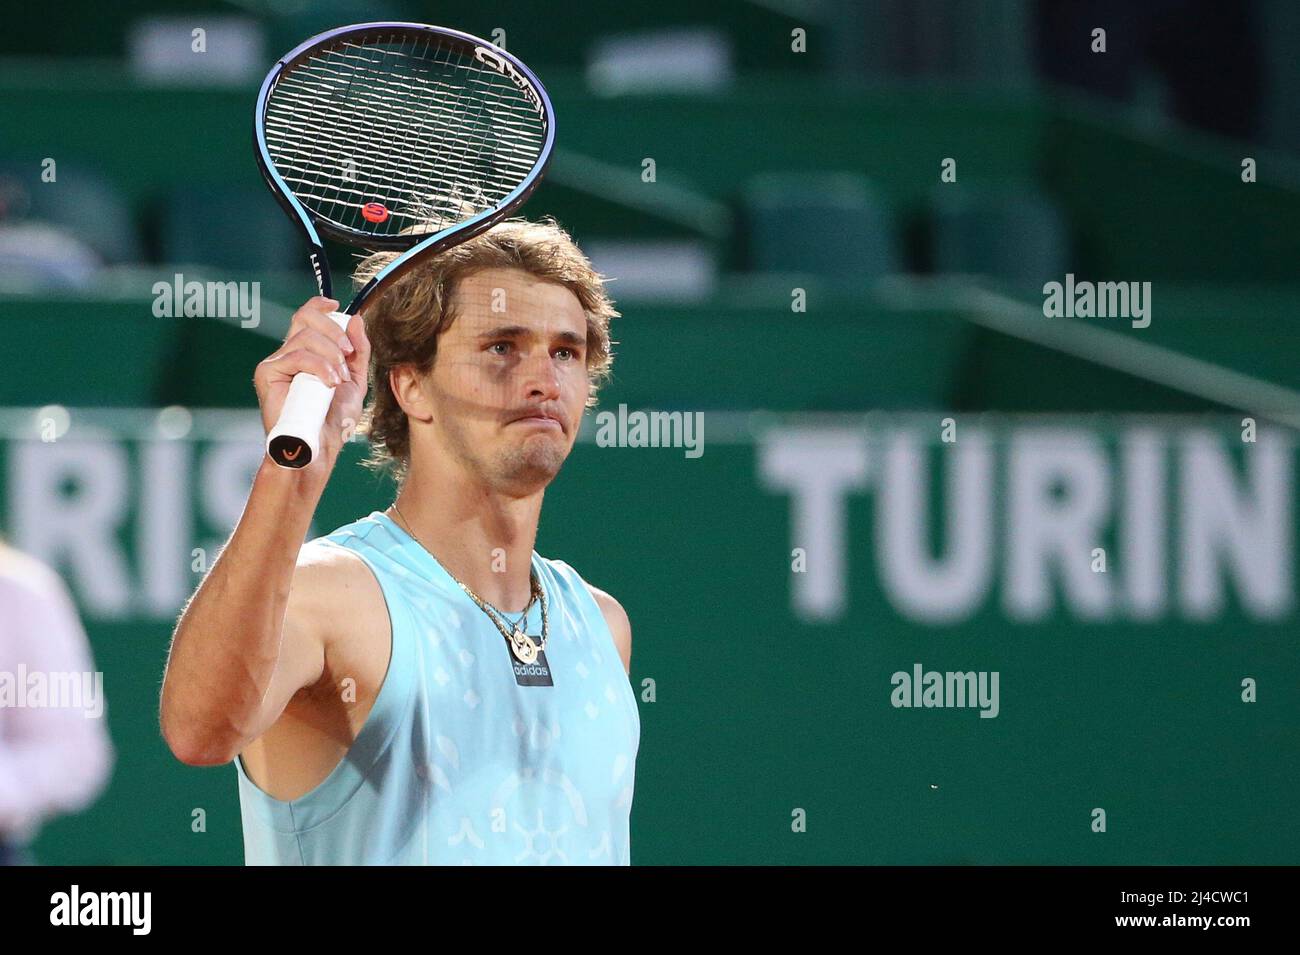 Alexander Zverev aka Sascha Zverev of Germany celebrates his victory during  day 4 of the Rolex Monte-Carlo Masters 2022, an ATP Masters 1000 tennis  tournament on April 13, 2022, held at the